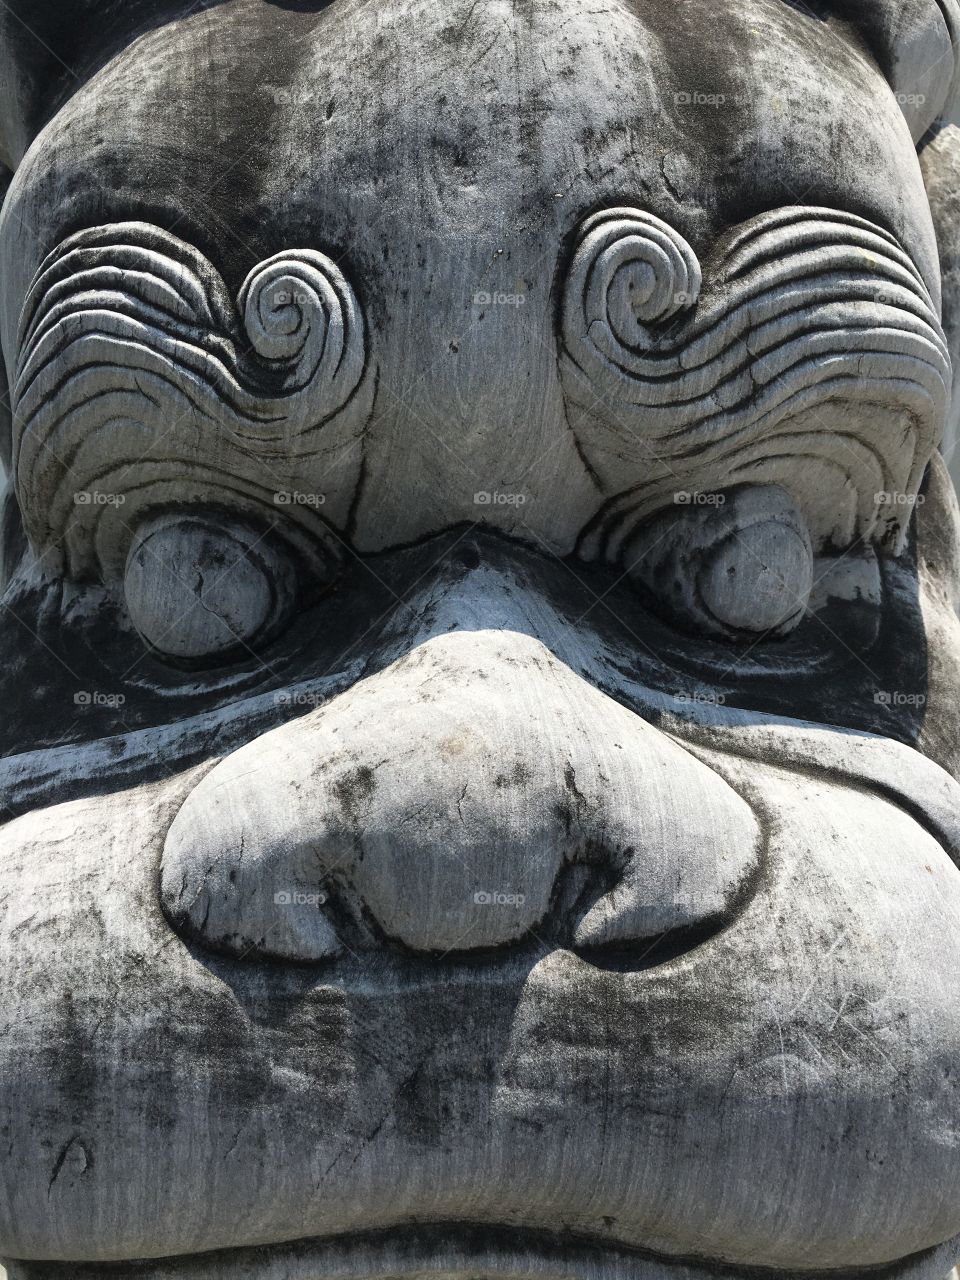 Chinese Traditional Stone Dragon in Shenzhen , China